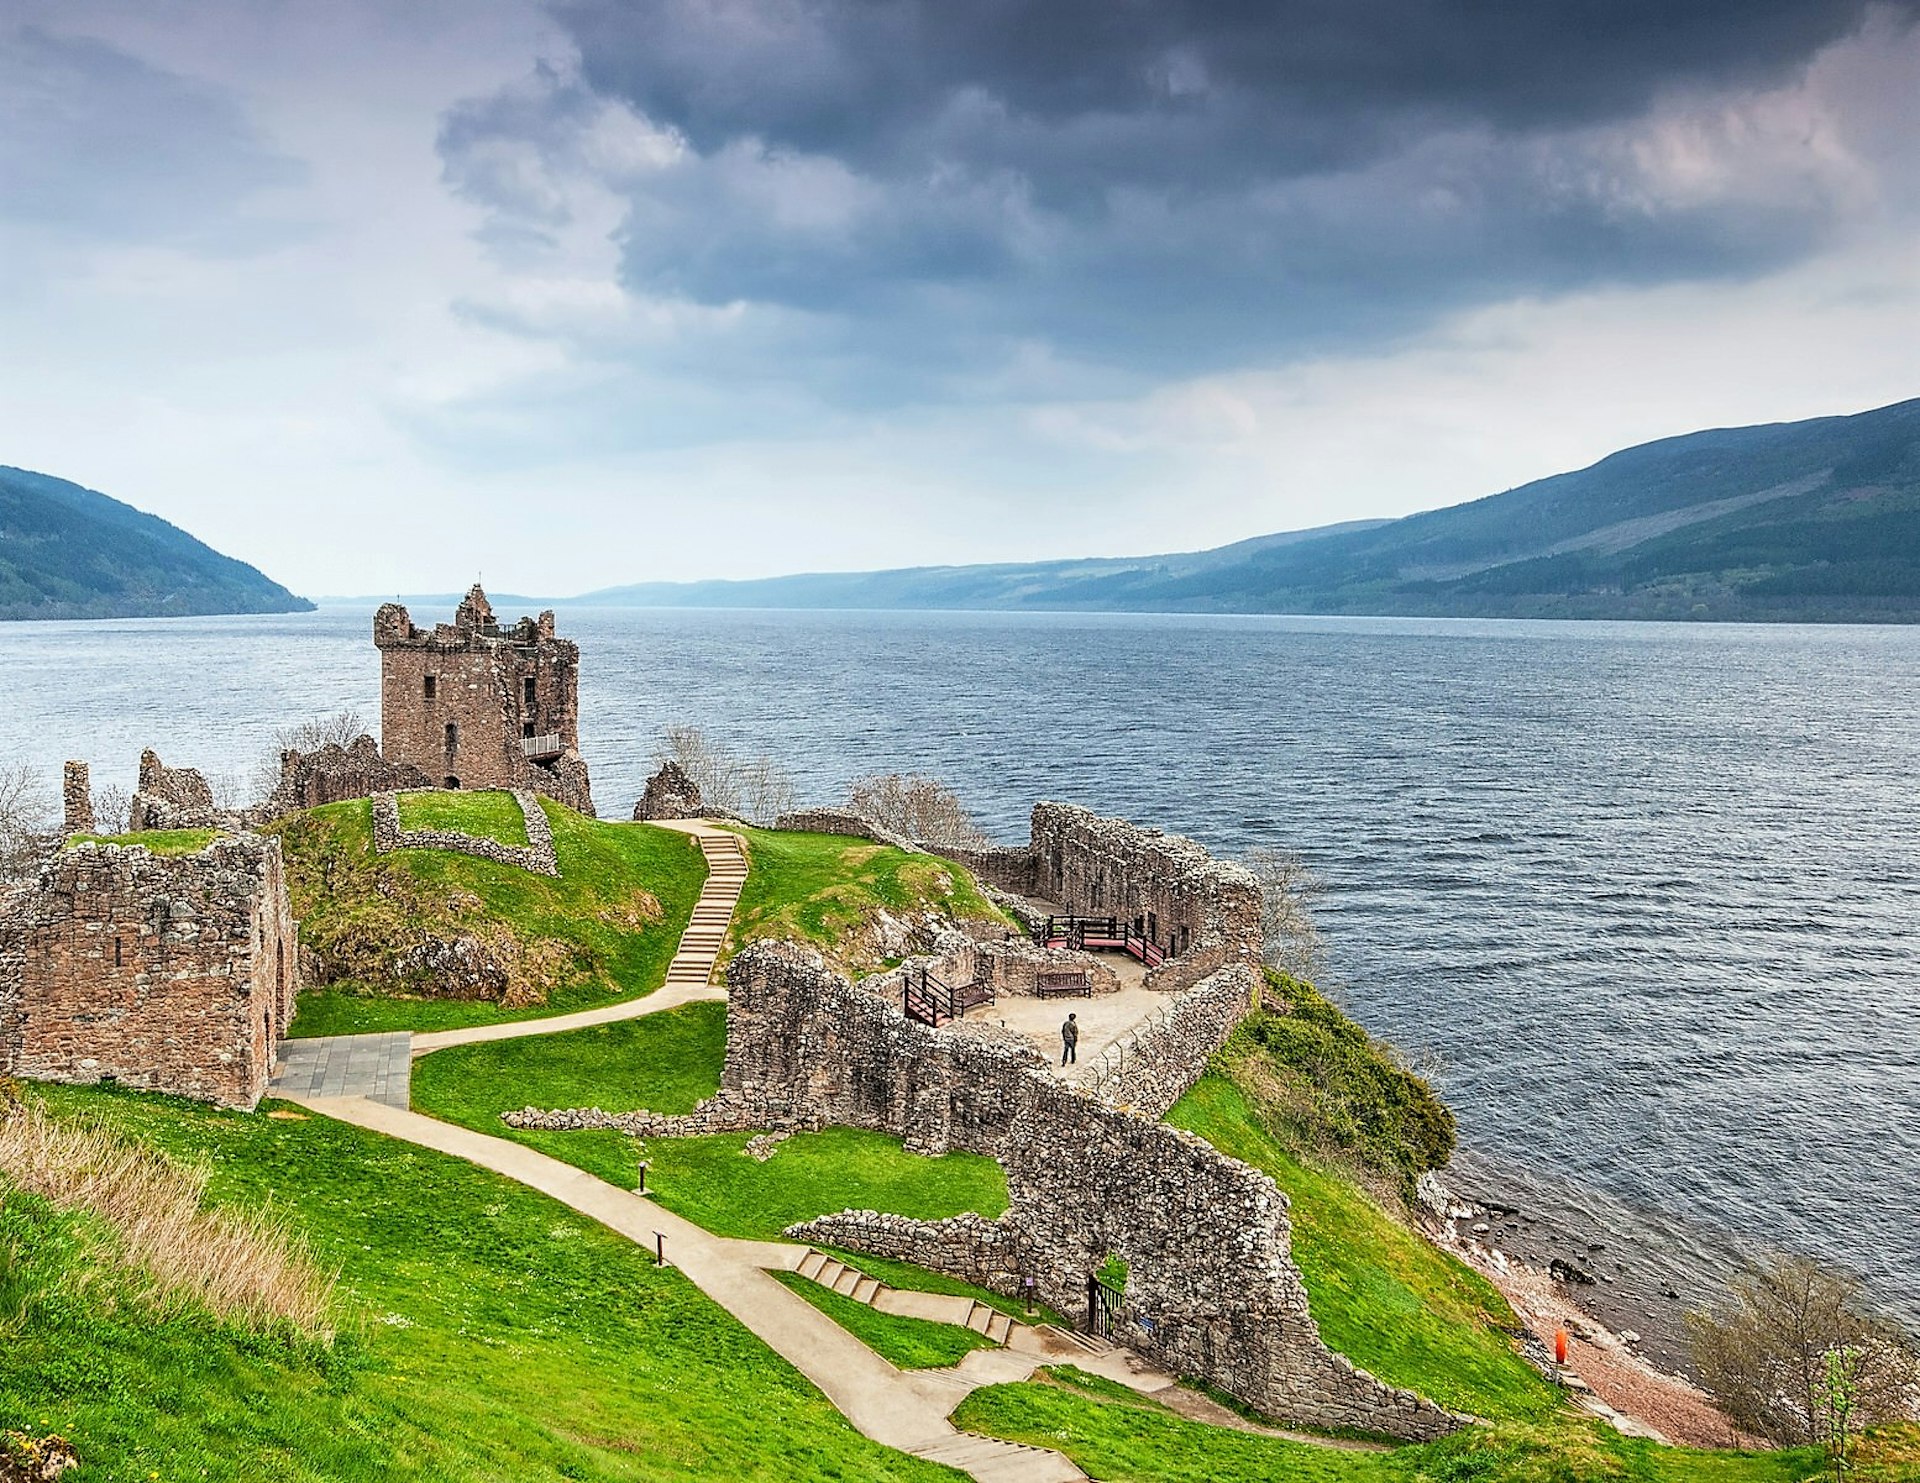 A castle on a green outcropping with a long winding road overlooking the dark blue expanse of Loch Ness